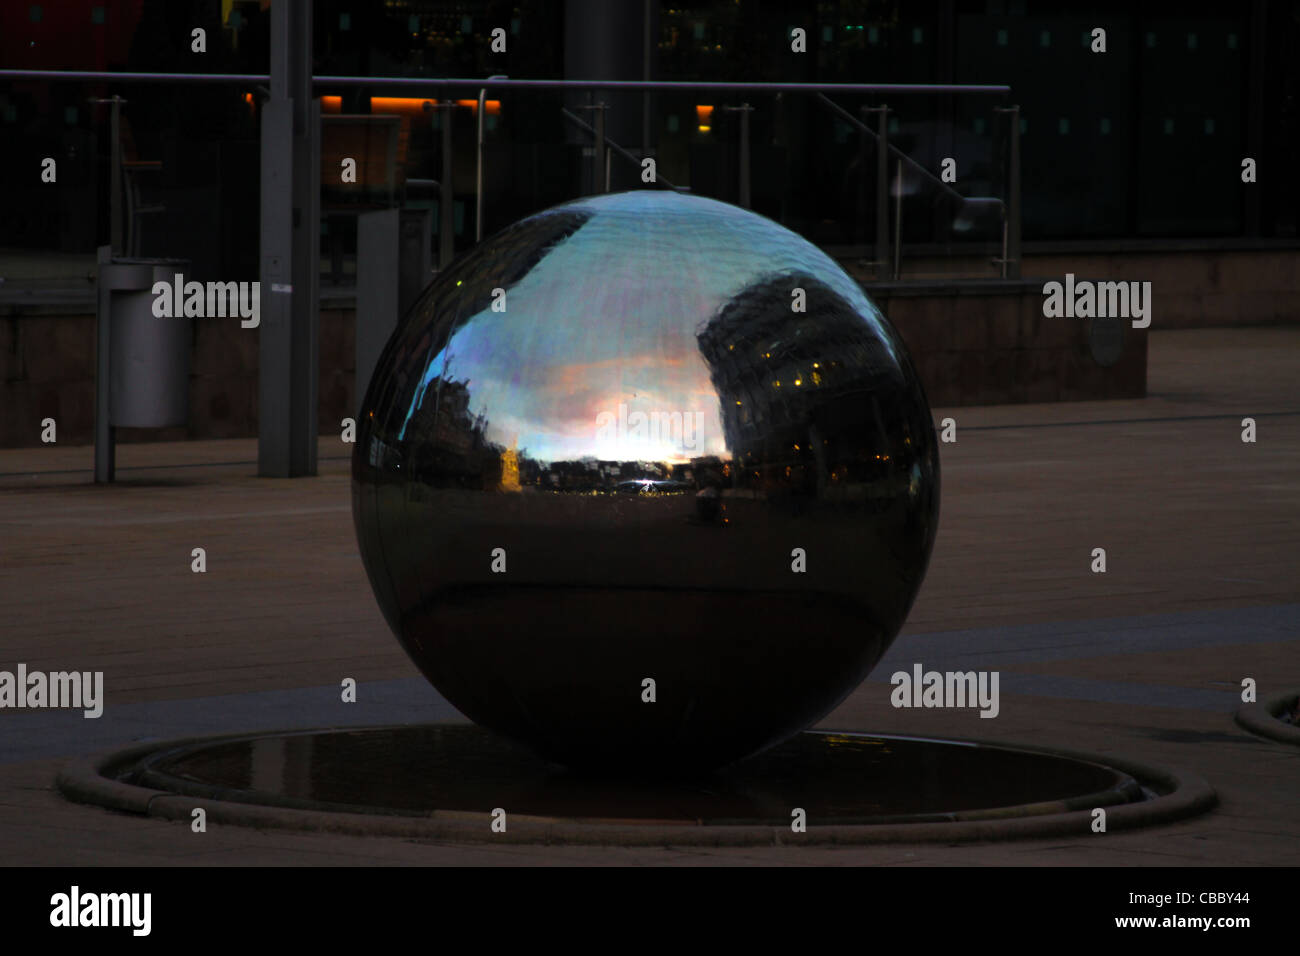 Stainless Steel Sphere and Bright Sky Reflection with Orange Clouds And A Building On Early Evening Stock Photo